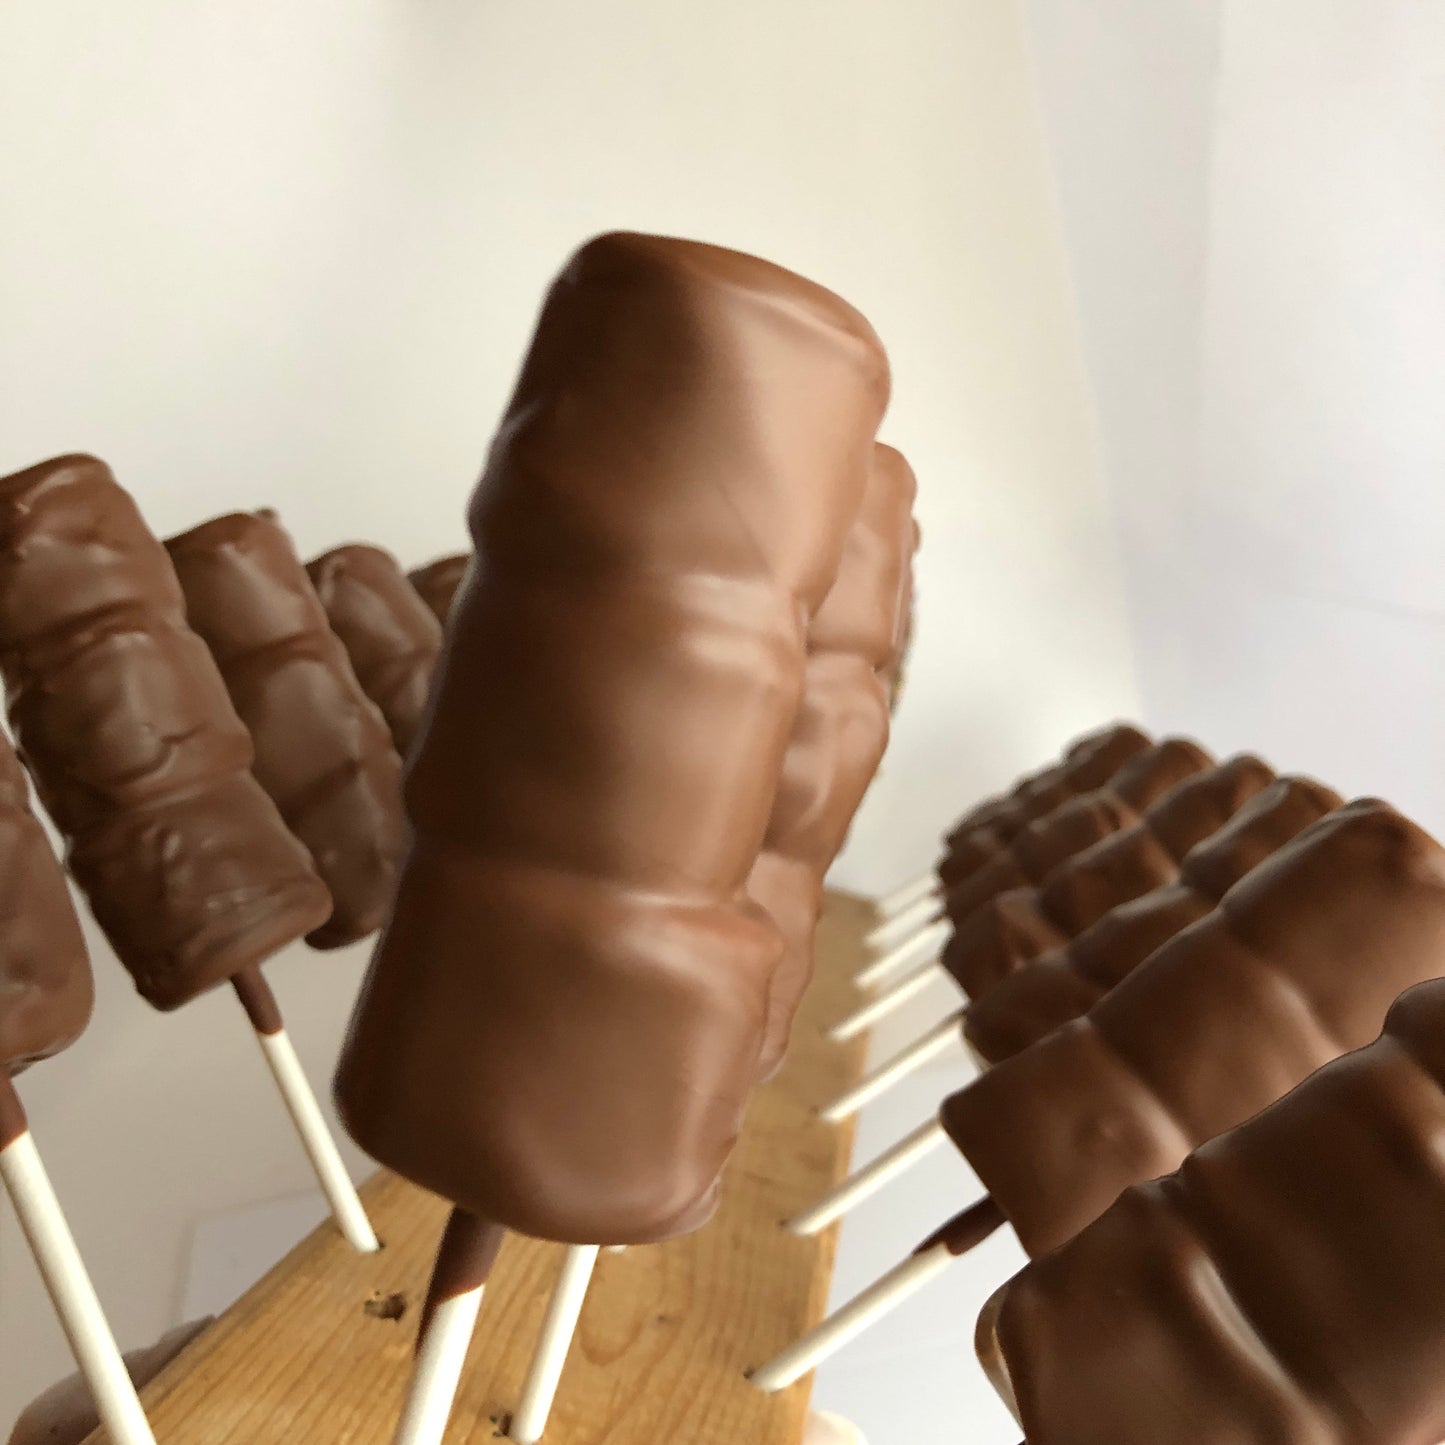 Marshmallows dipped in MILK chocolate